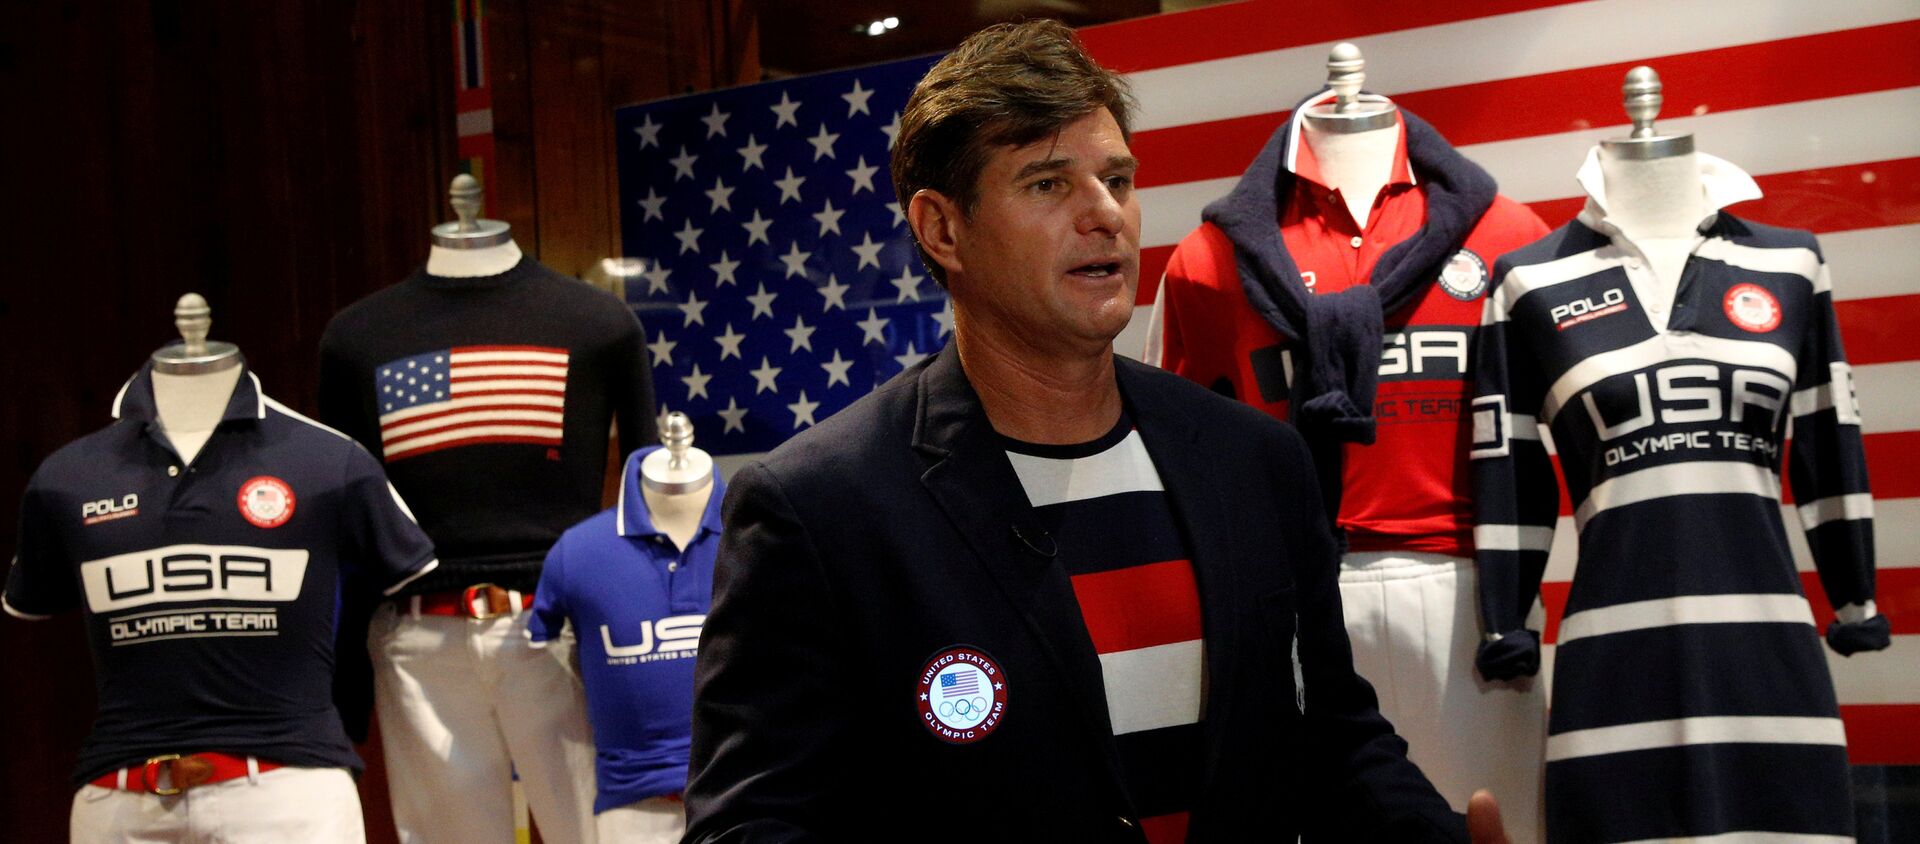 Cliff Meidl, two-time U.S. Olympic athlete, models the official Team USA Opening Ceremony flag bearer outfit which will include special electroluminescent panels, at the Polo Ralph Lauren store in New York City, U.S., July 29, 2016 - Sputnik International, 1920, 24.07.2021